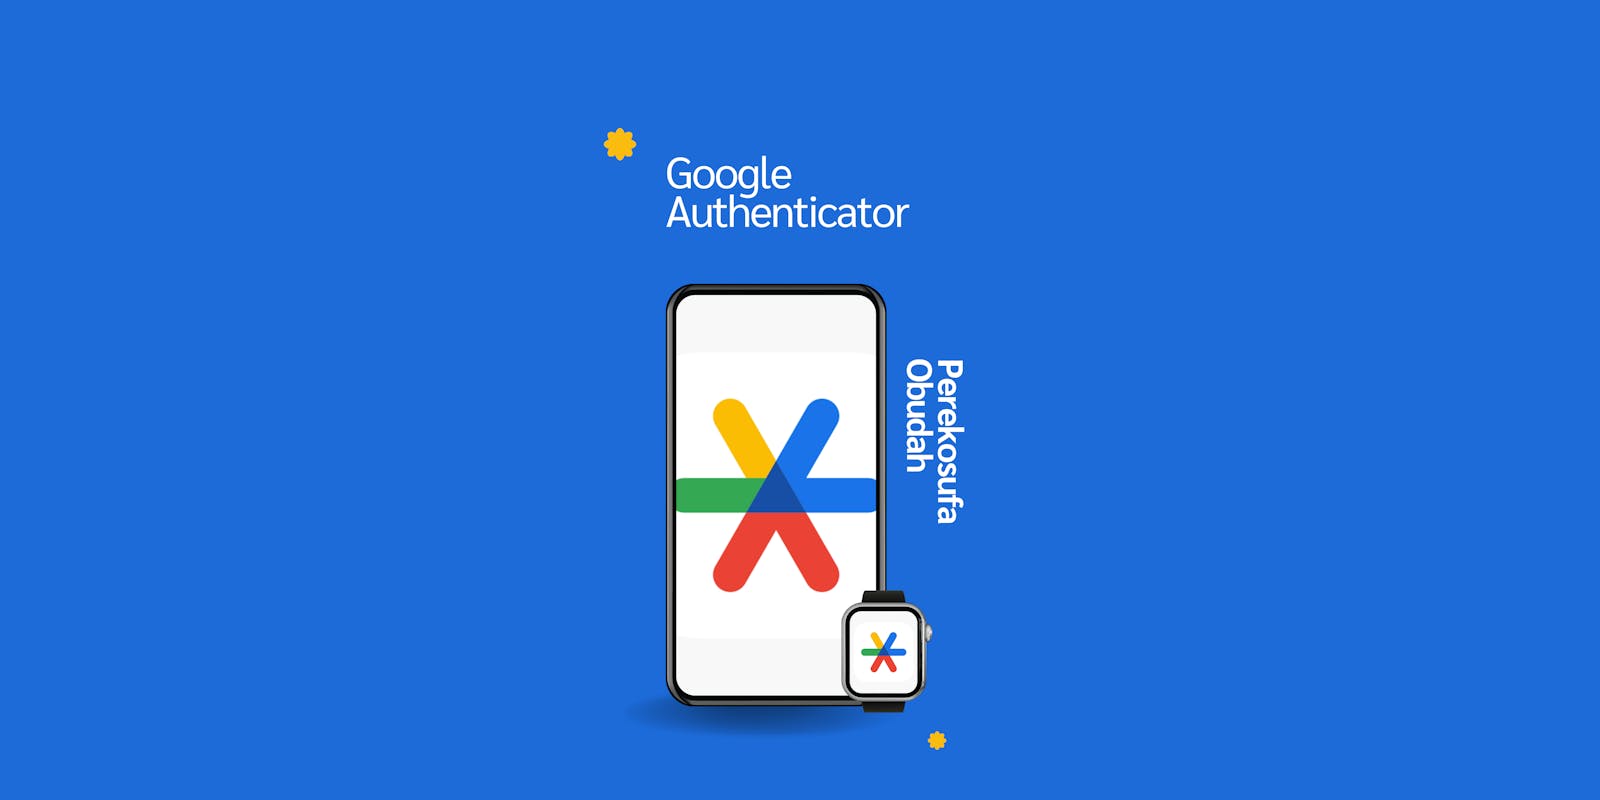 Release Notes: Google Authenticator Version 6.0